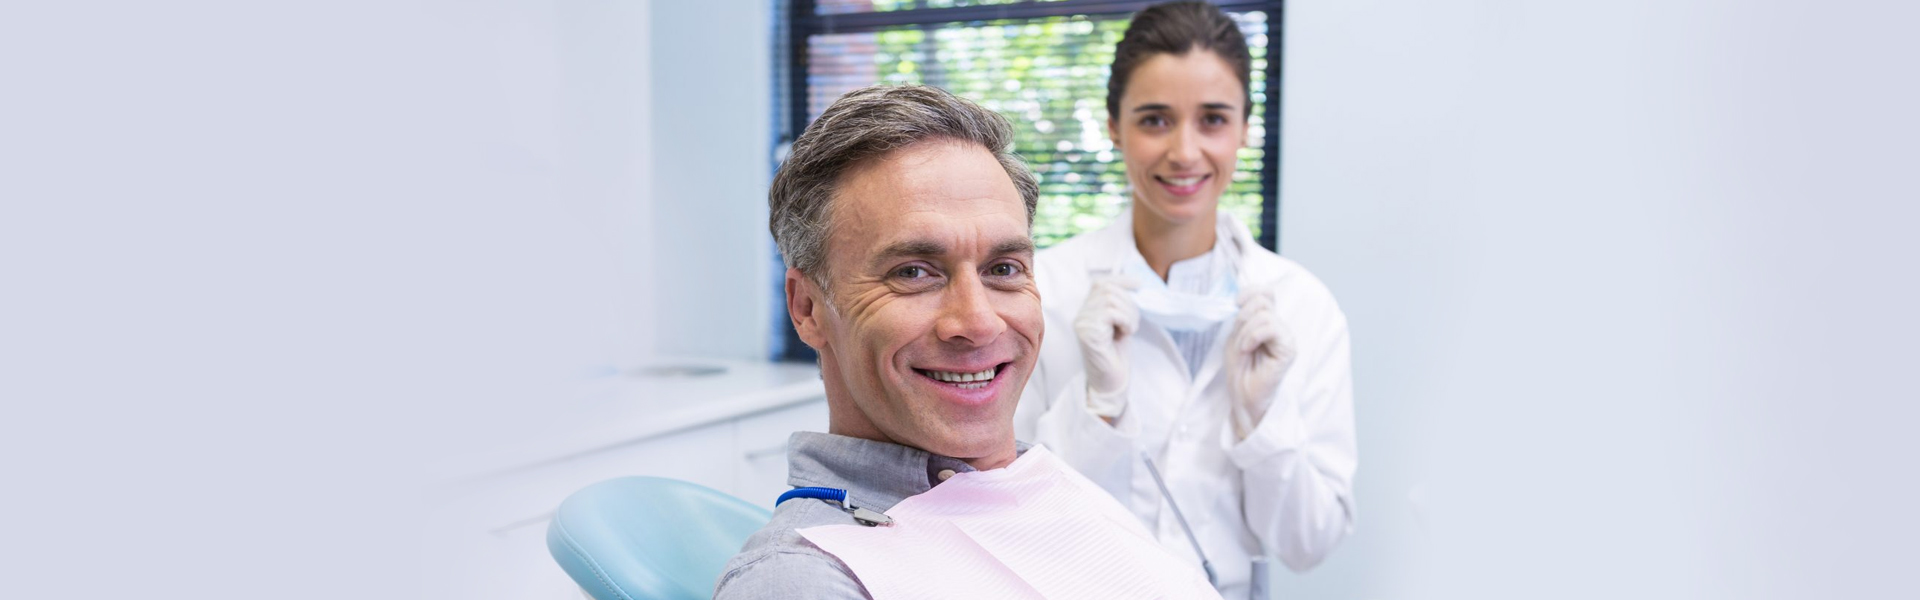 Do Not Fear Tooth Extractions: They Benefit Your Oral and Overall Health